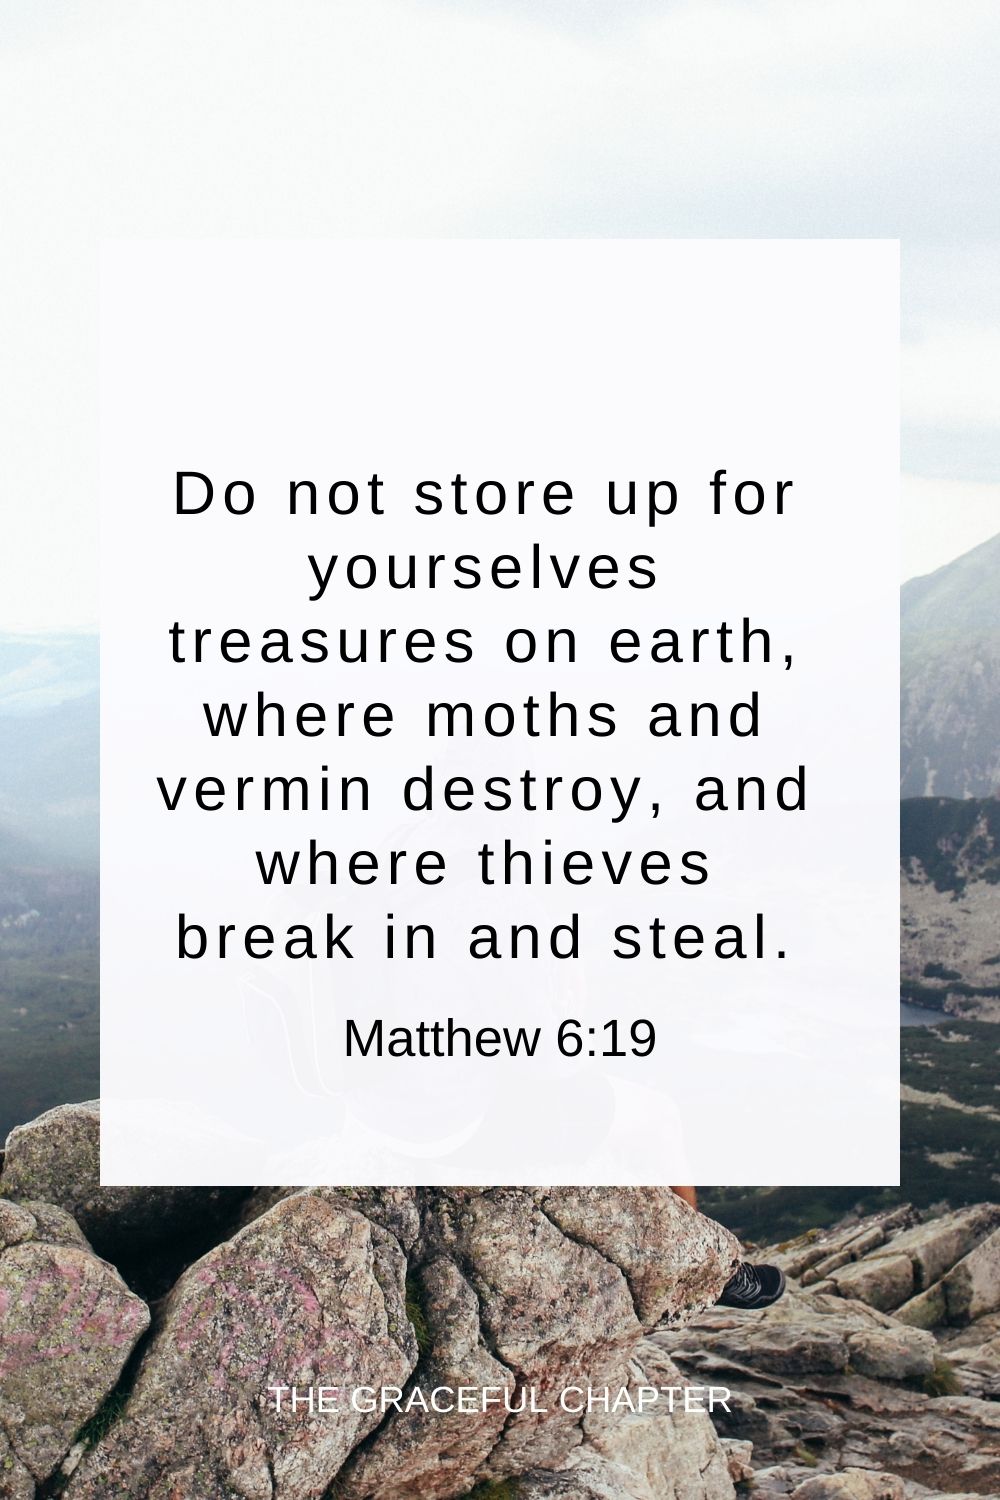 Do not store up for yourselves treasures on earth, where moths and vermin destroy, and where thieves break in and steal. Matthew 6:19